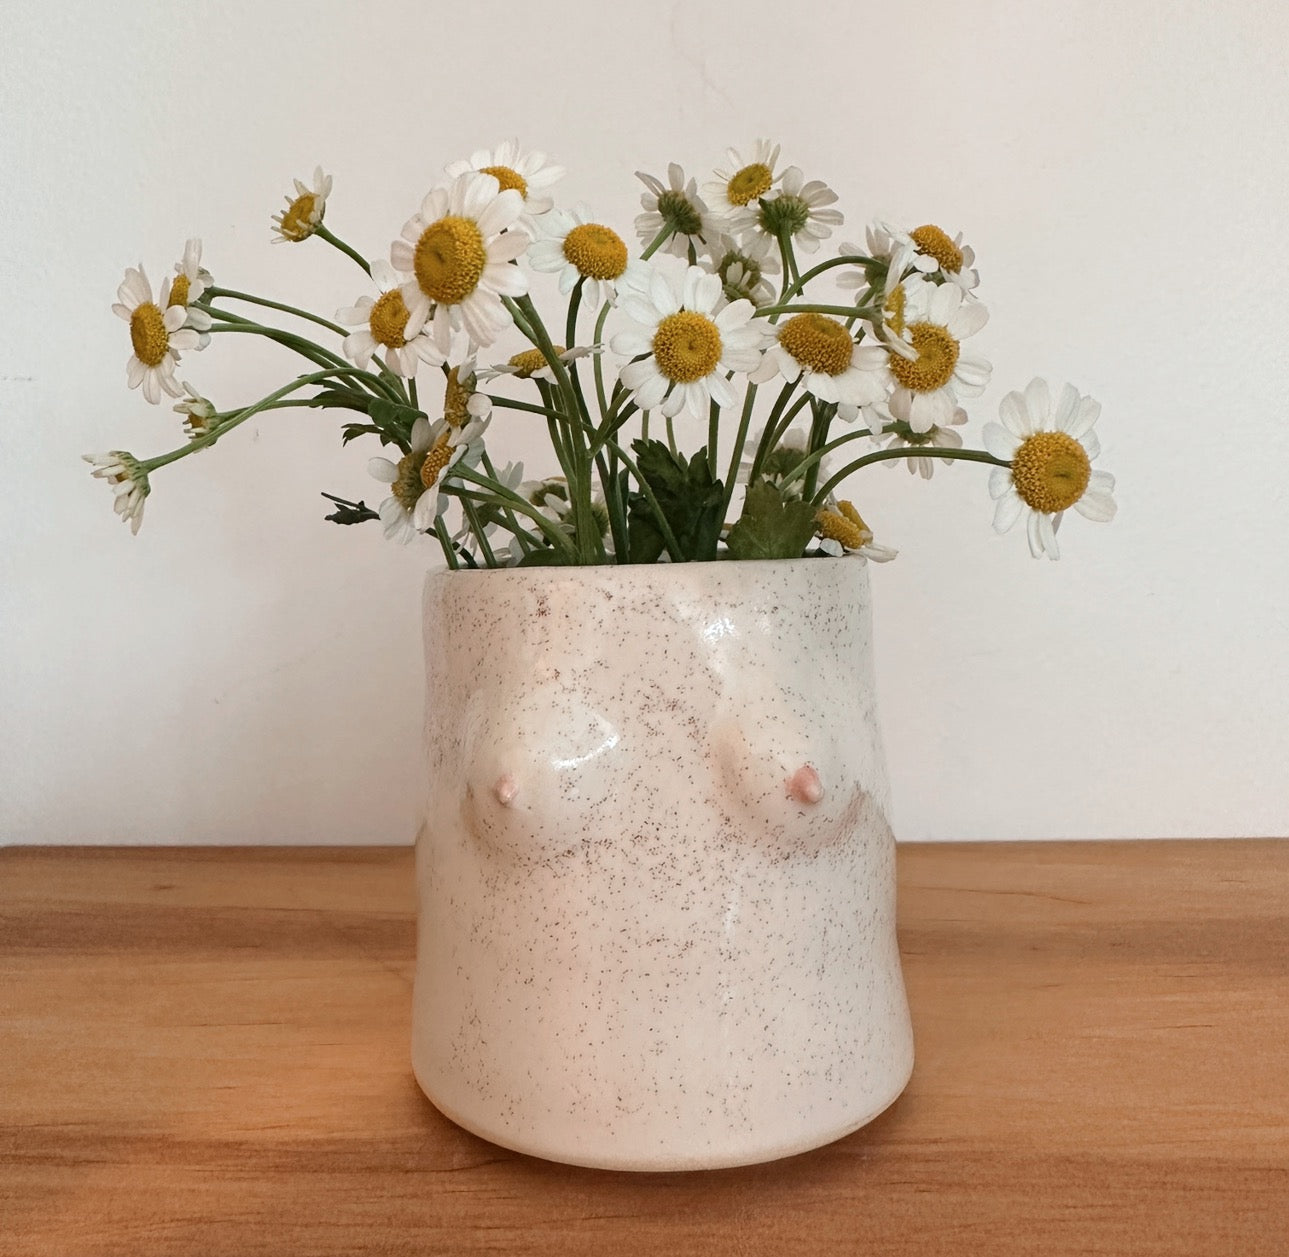 The Brooklyn Ceramicist Behind the Insanely Popular Boob Pots - Sight  Unseen